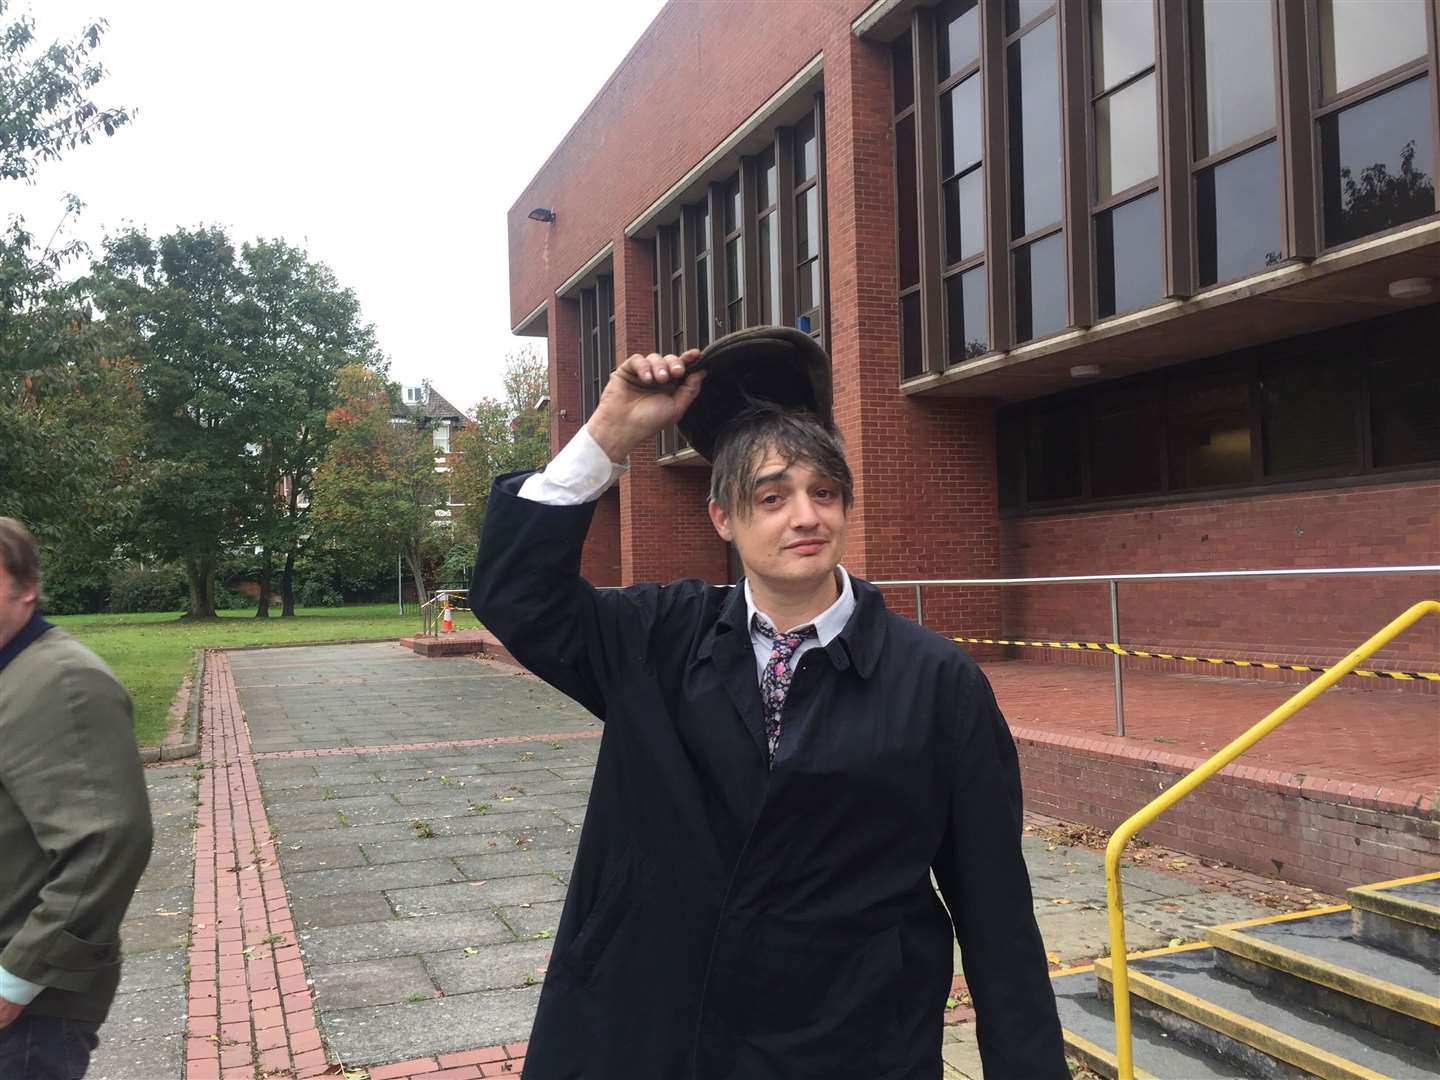 Pete Doherty doffed his hat outside Folkestone Magistrates' Court after being banned from driving three years ago